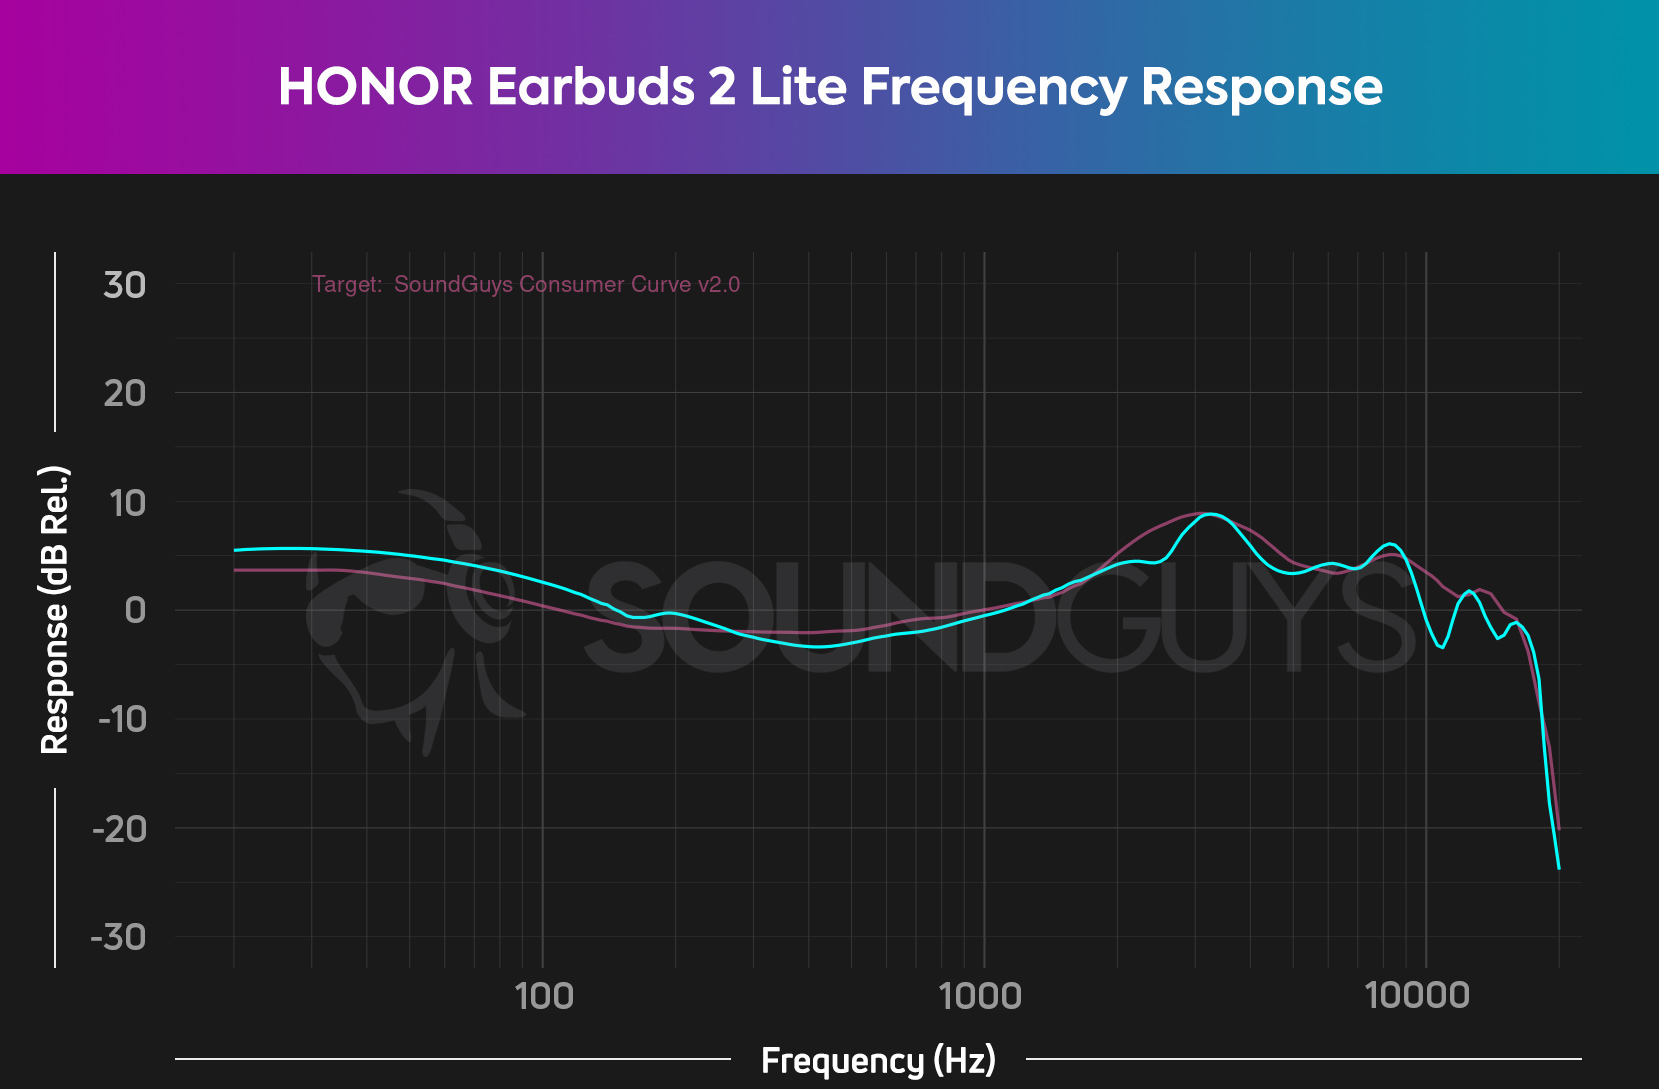 This shows the honor earbuds 2 lite frequency response.